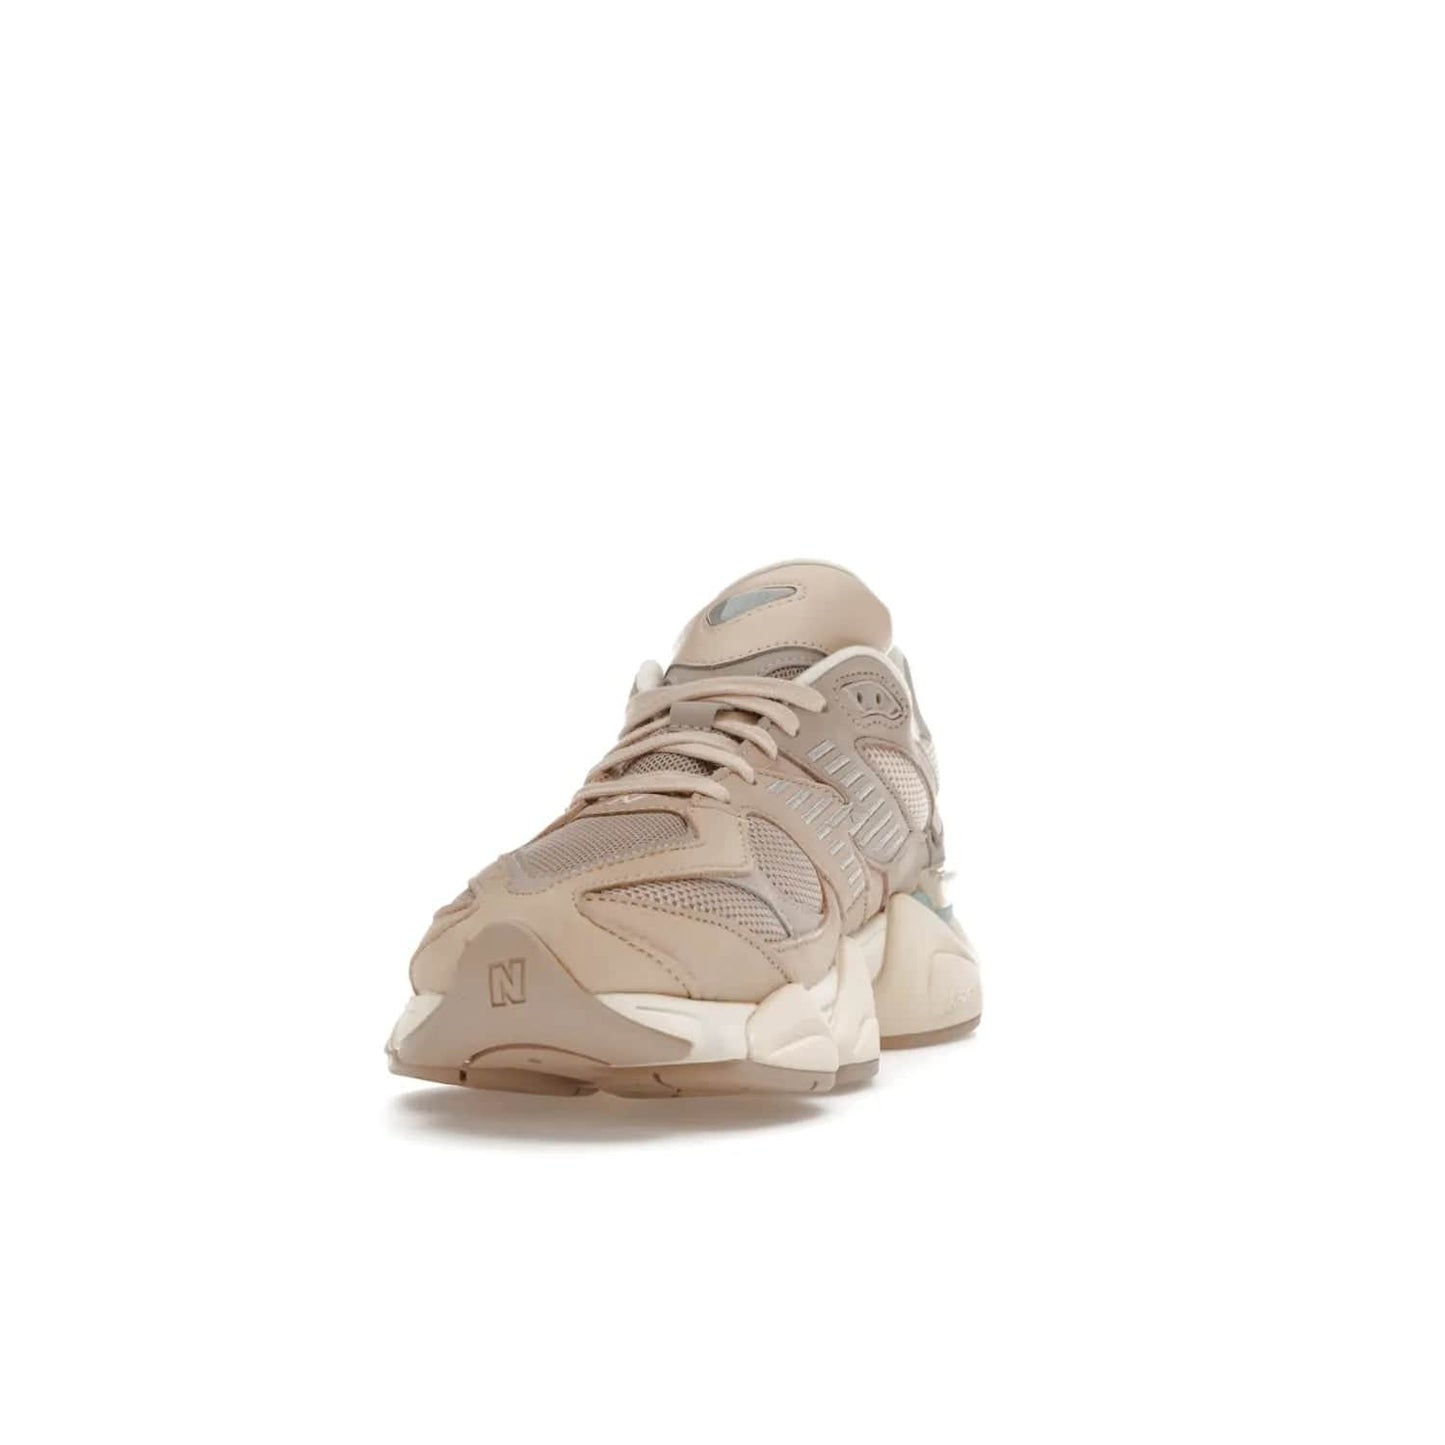 New Balance 9060 Ivory Cream Pink Sand - Image 12 - Only at www.BallersClubKickz.com - New Balance 9060 Ivory Cream Pink Sand - Sleek meshed upper, premium suede overlays, ABZORB cushioning. Get this unique sneaker ahead of the trend, launching December 6th, 2022!